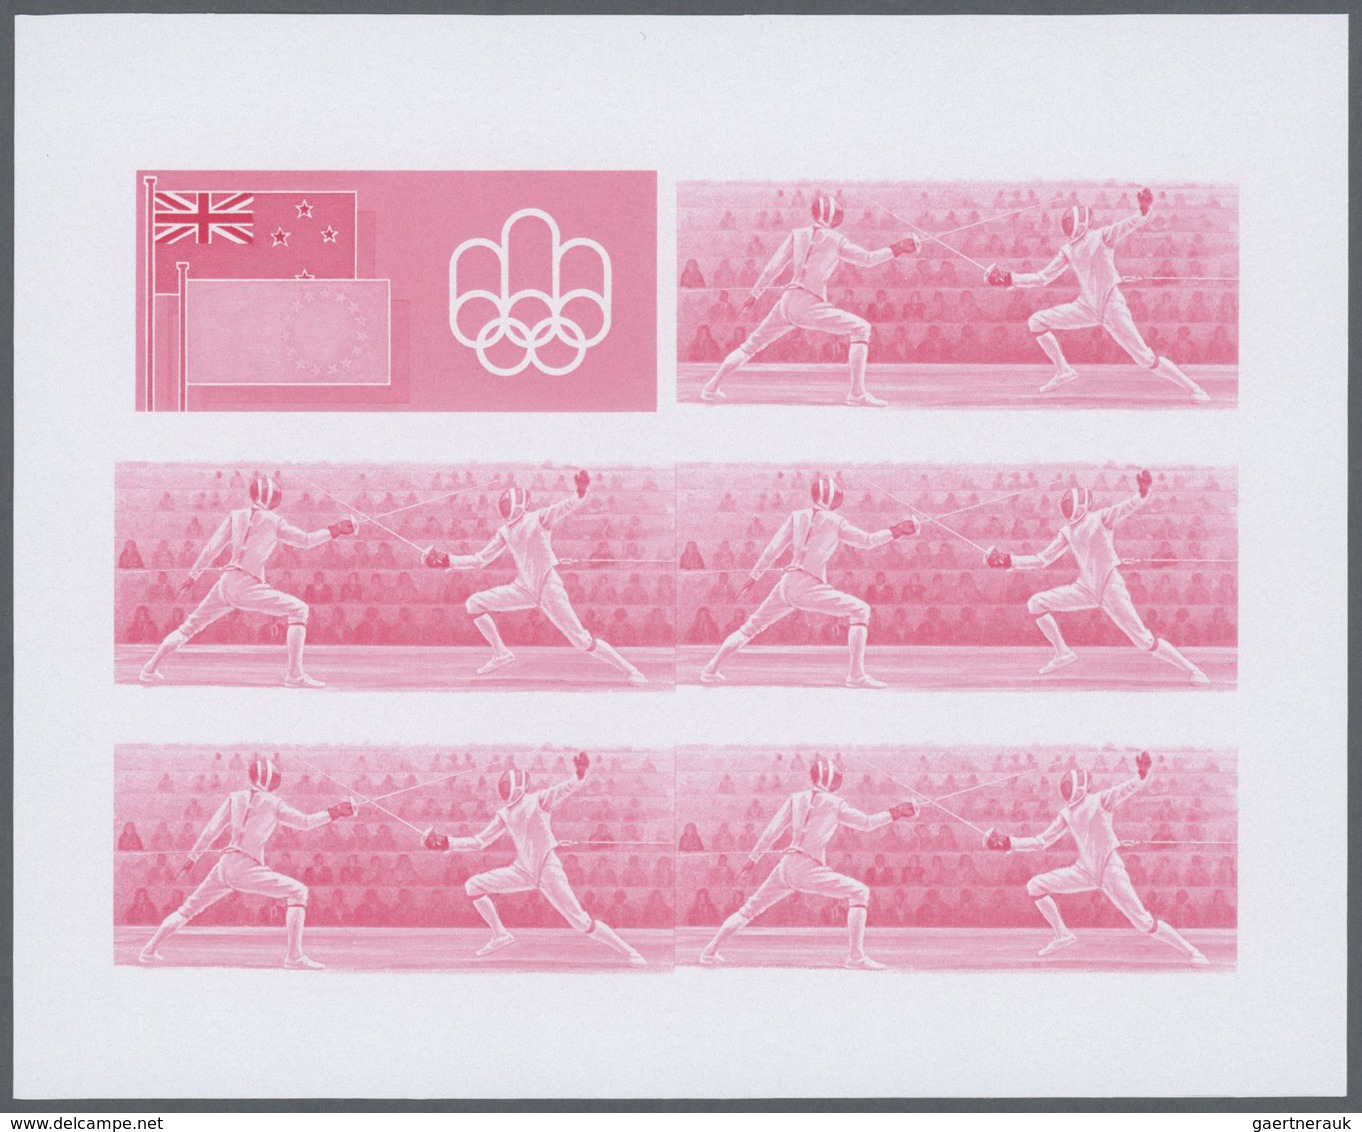 25325 Thematik: Olympische Spiele / olympic games: 1976, Cook Islands. Progressive proofs set of sheets fo